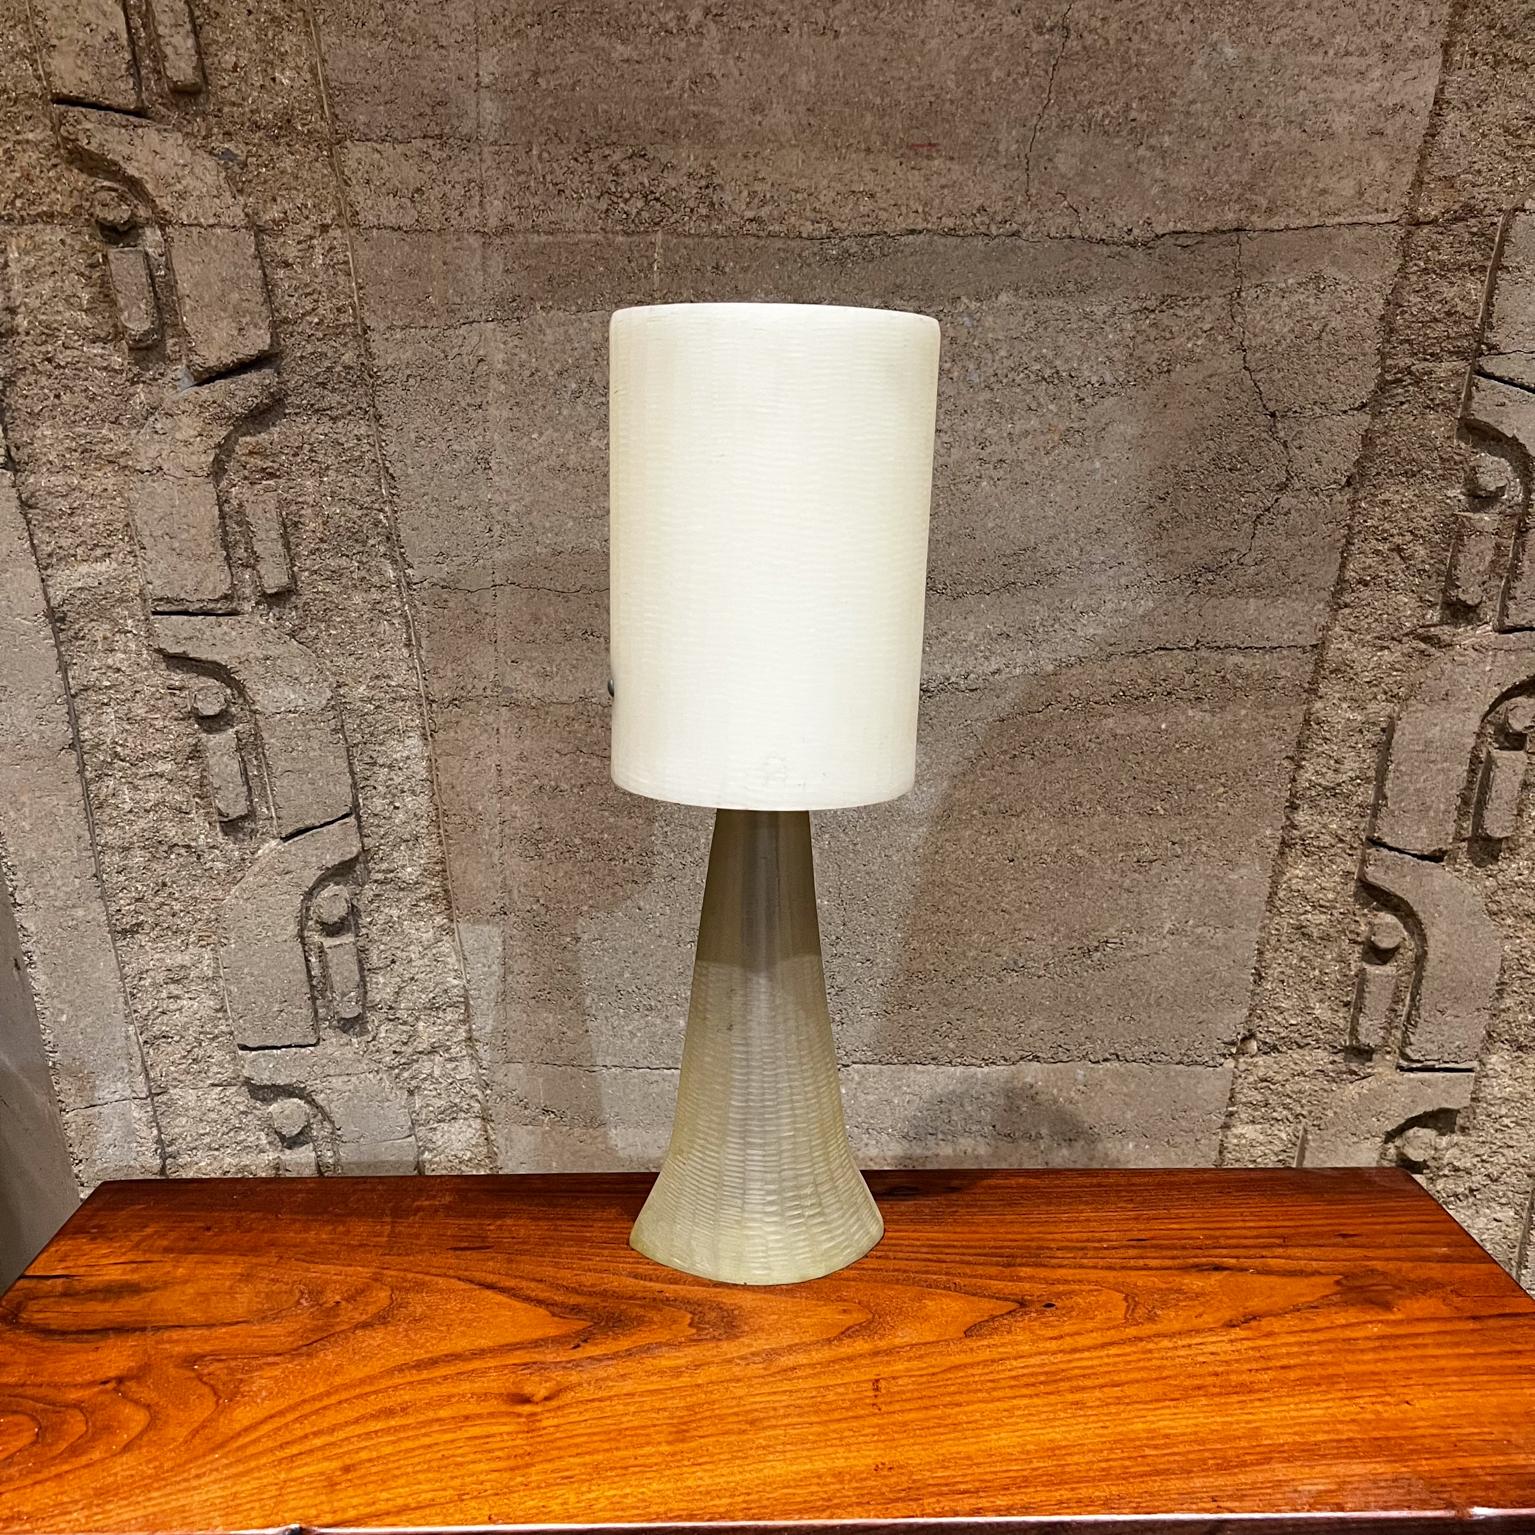 1970s Resin Table Lamp Midcentury Modern Vintage
18.75 h x 6.25 diameter
Original vintage condition.
Refer to images provided.